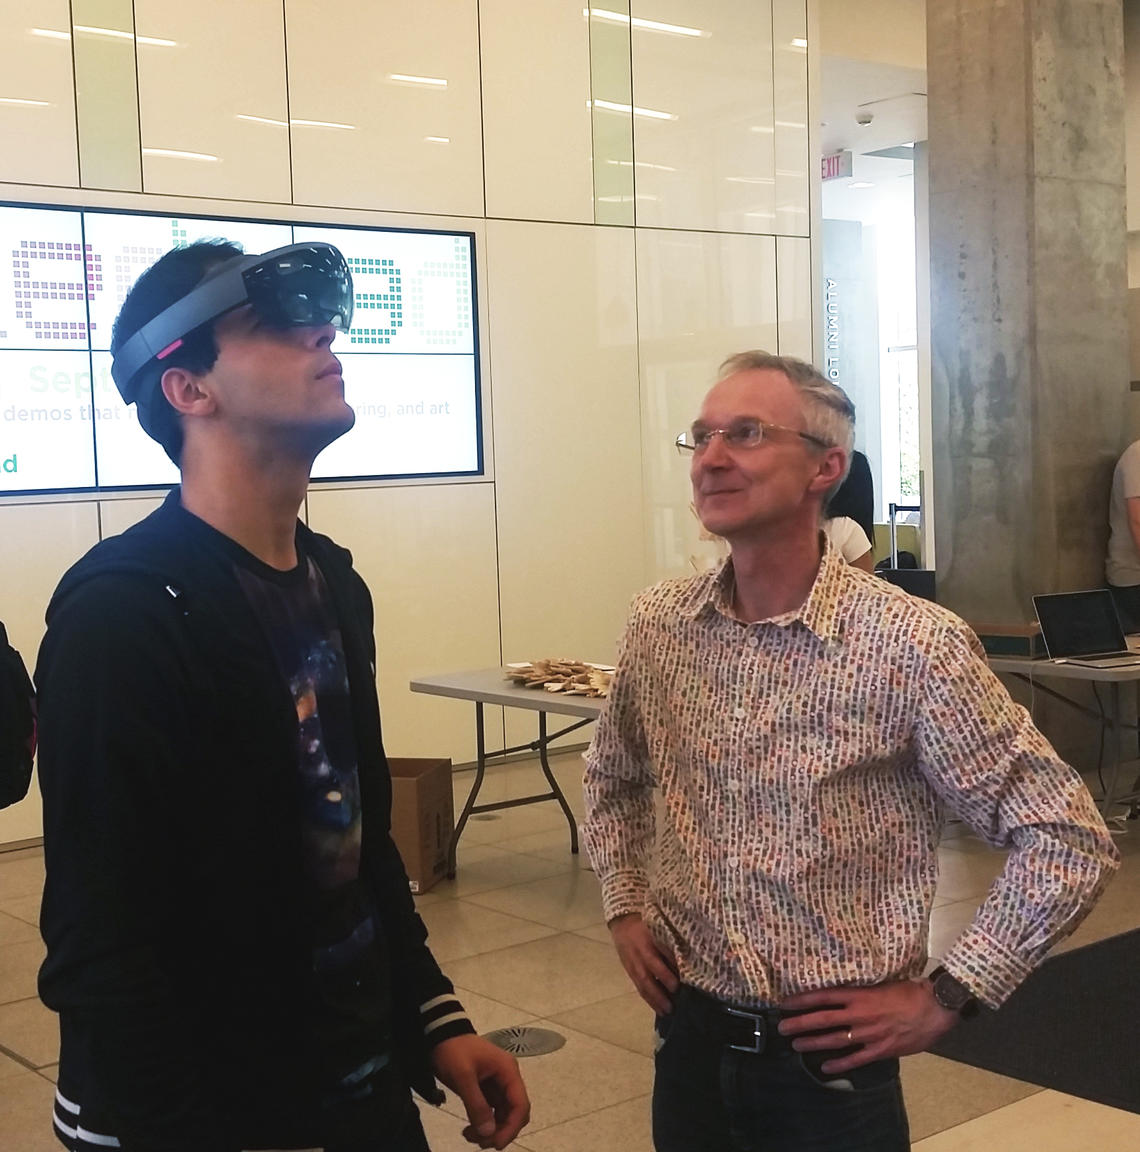 Arash Minhas, a third-year applied mathematics student, experiences the HoloLens and HoloCell during Beakerhead's Campus Collisions at the Taylor Family Digital Library on September 14.